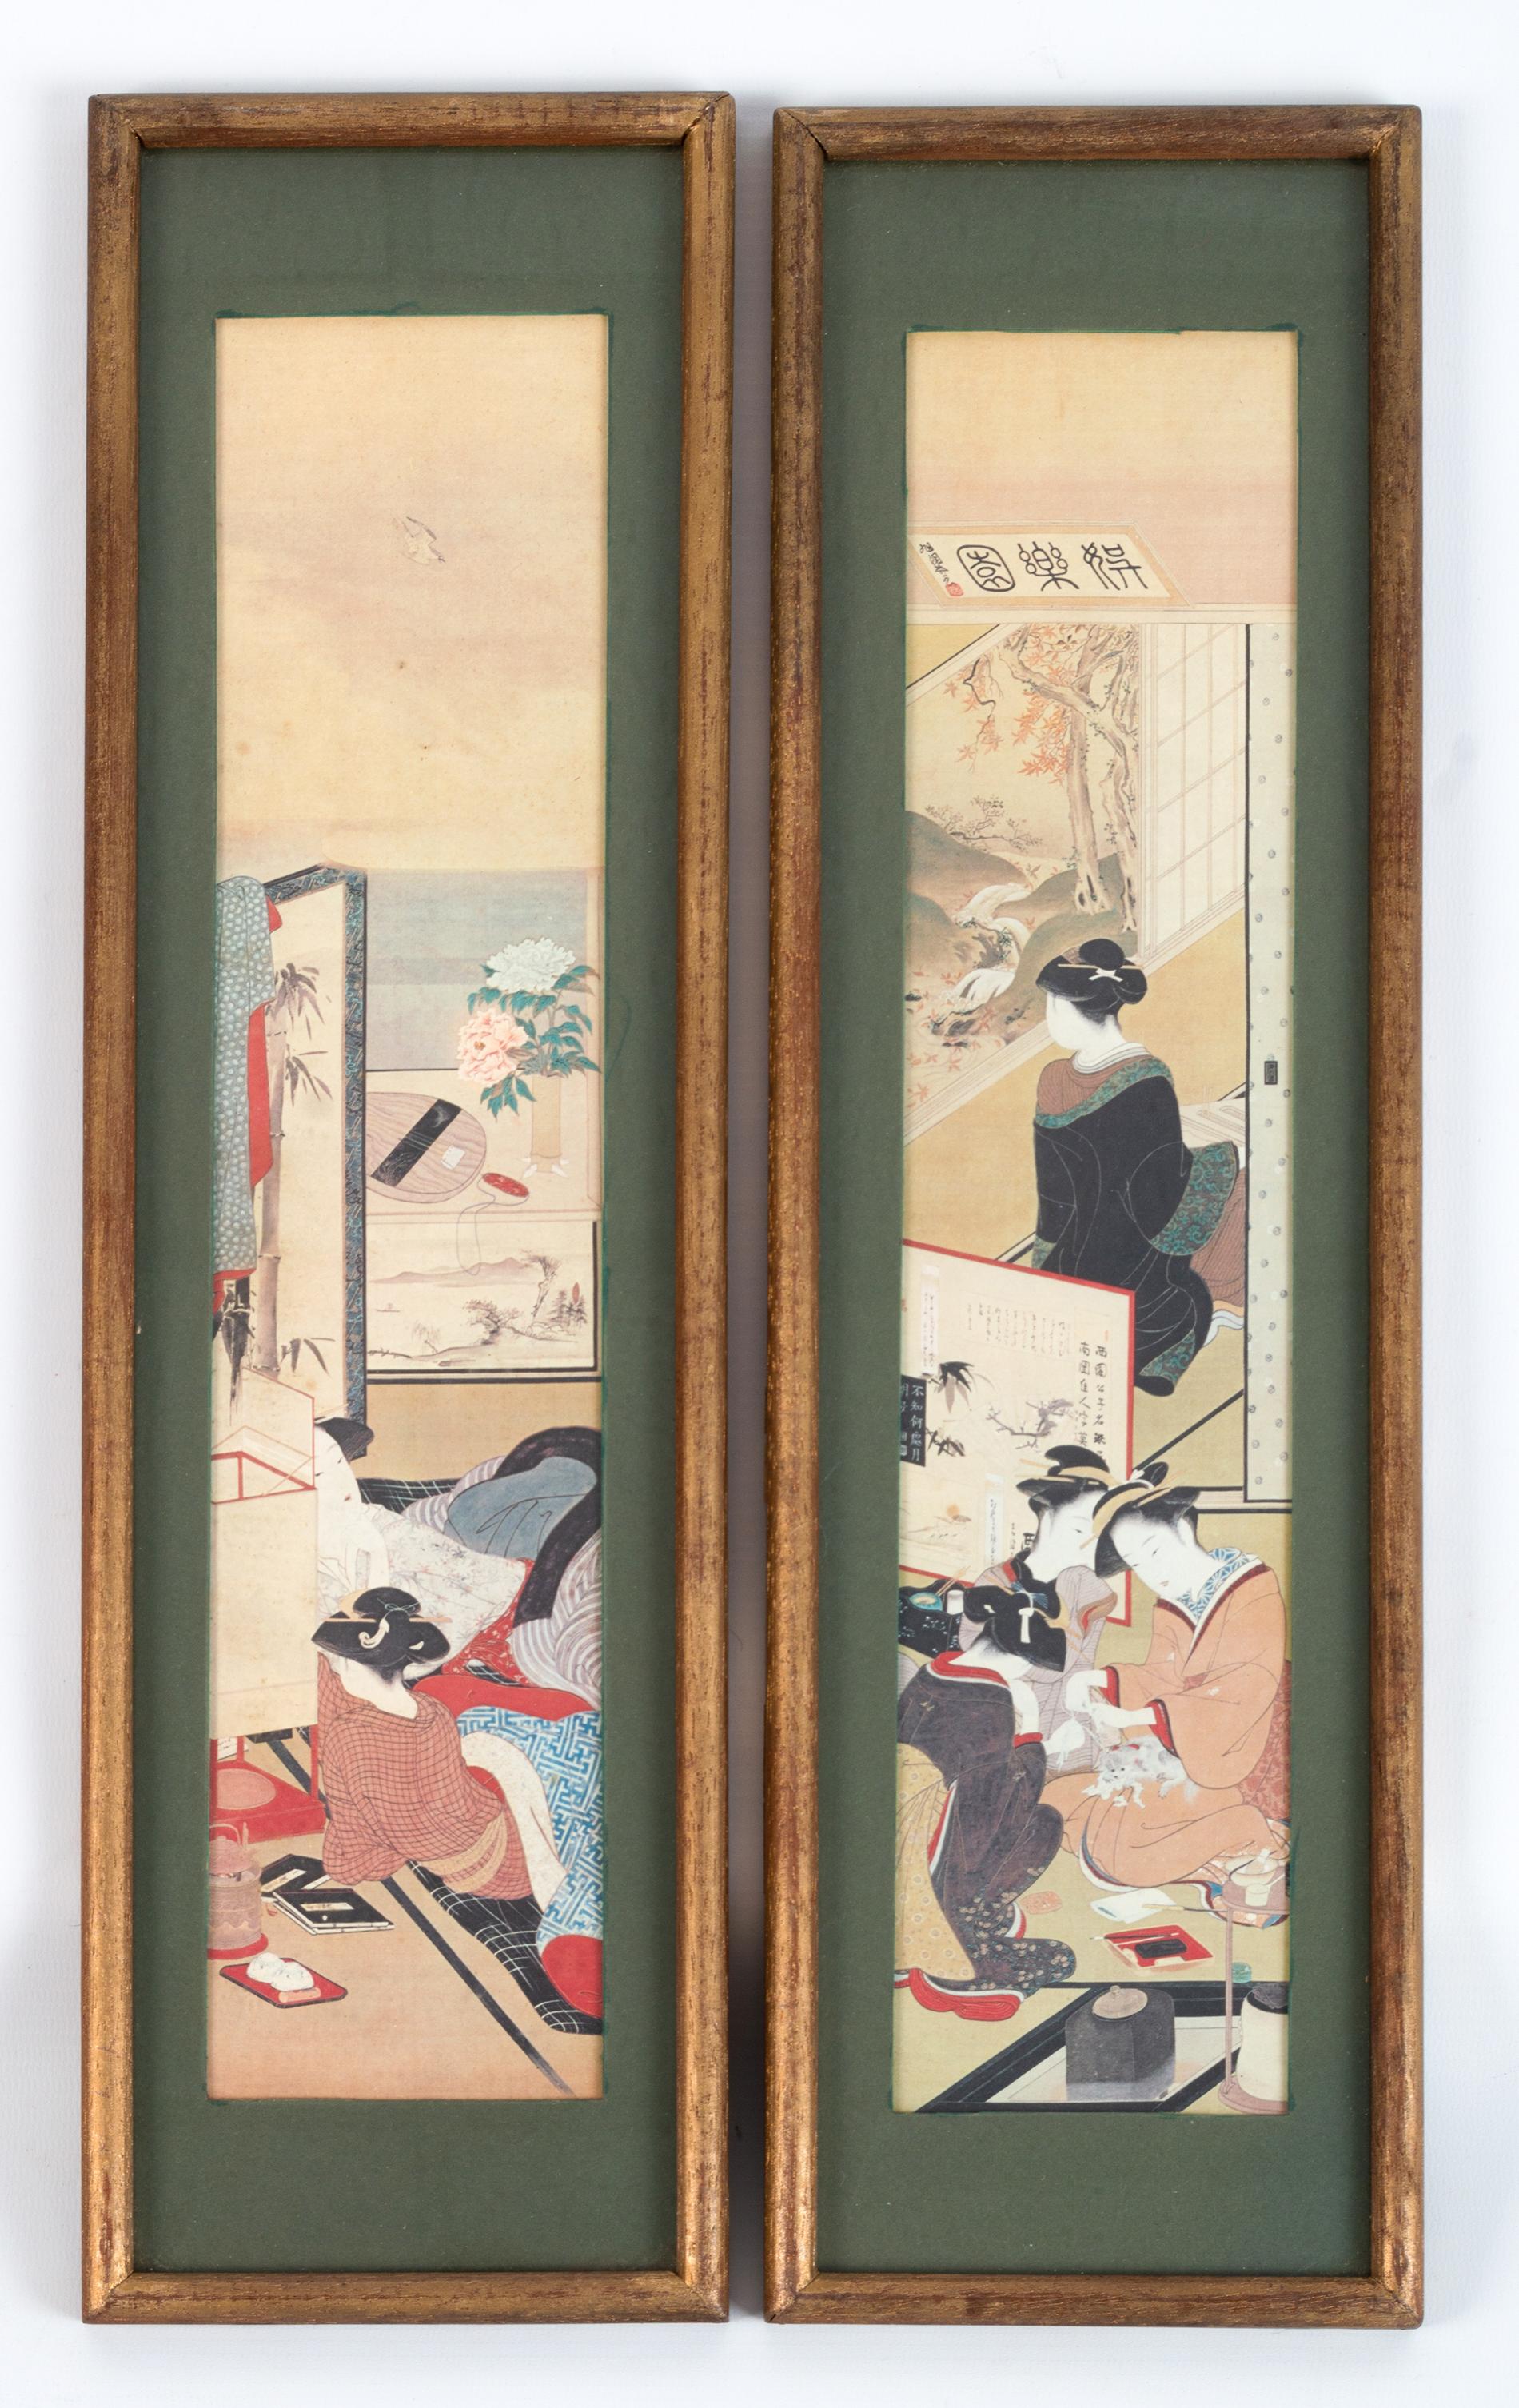 A vintage collection of 8 Japanese woodblock prints Japan, C.1930.
Mounted and gilt framed.

Long Panels:
W14 x H48

Smaller Panels:
W15 x H36.5

In excellent vintage condition commensurate with age.